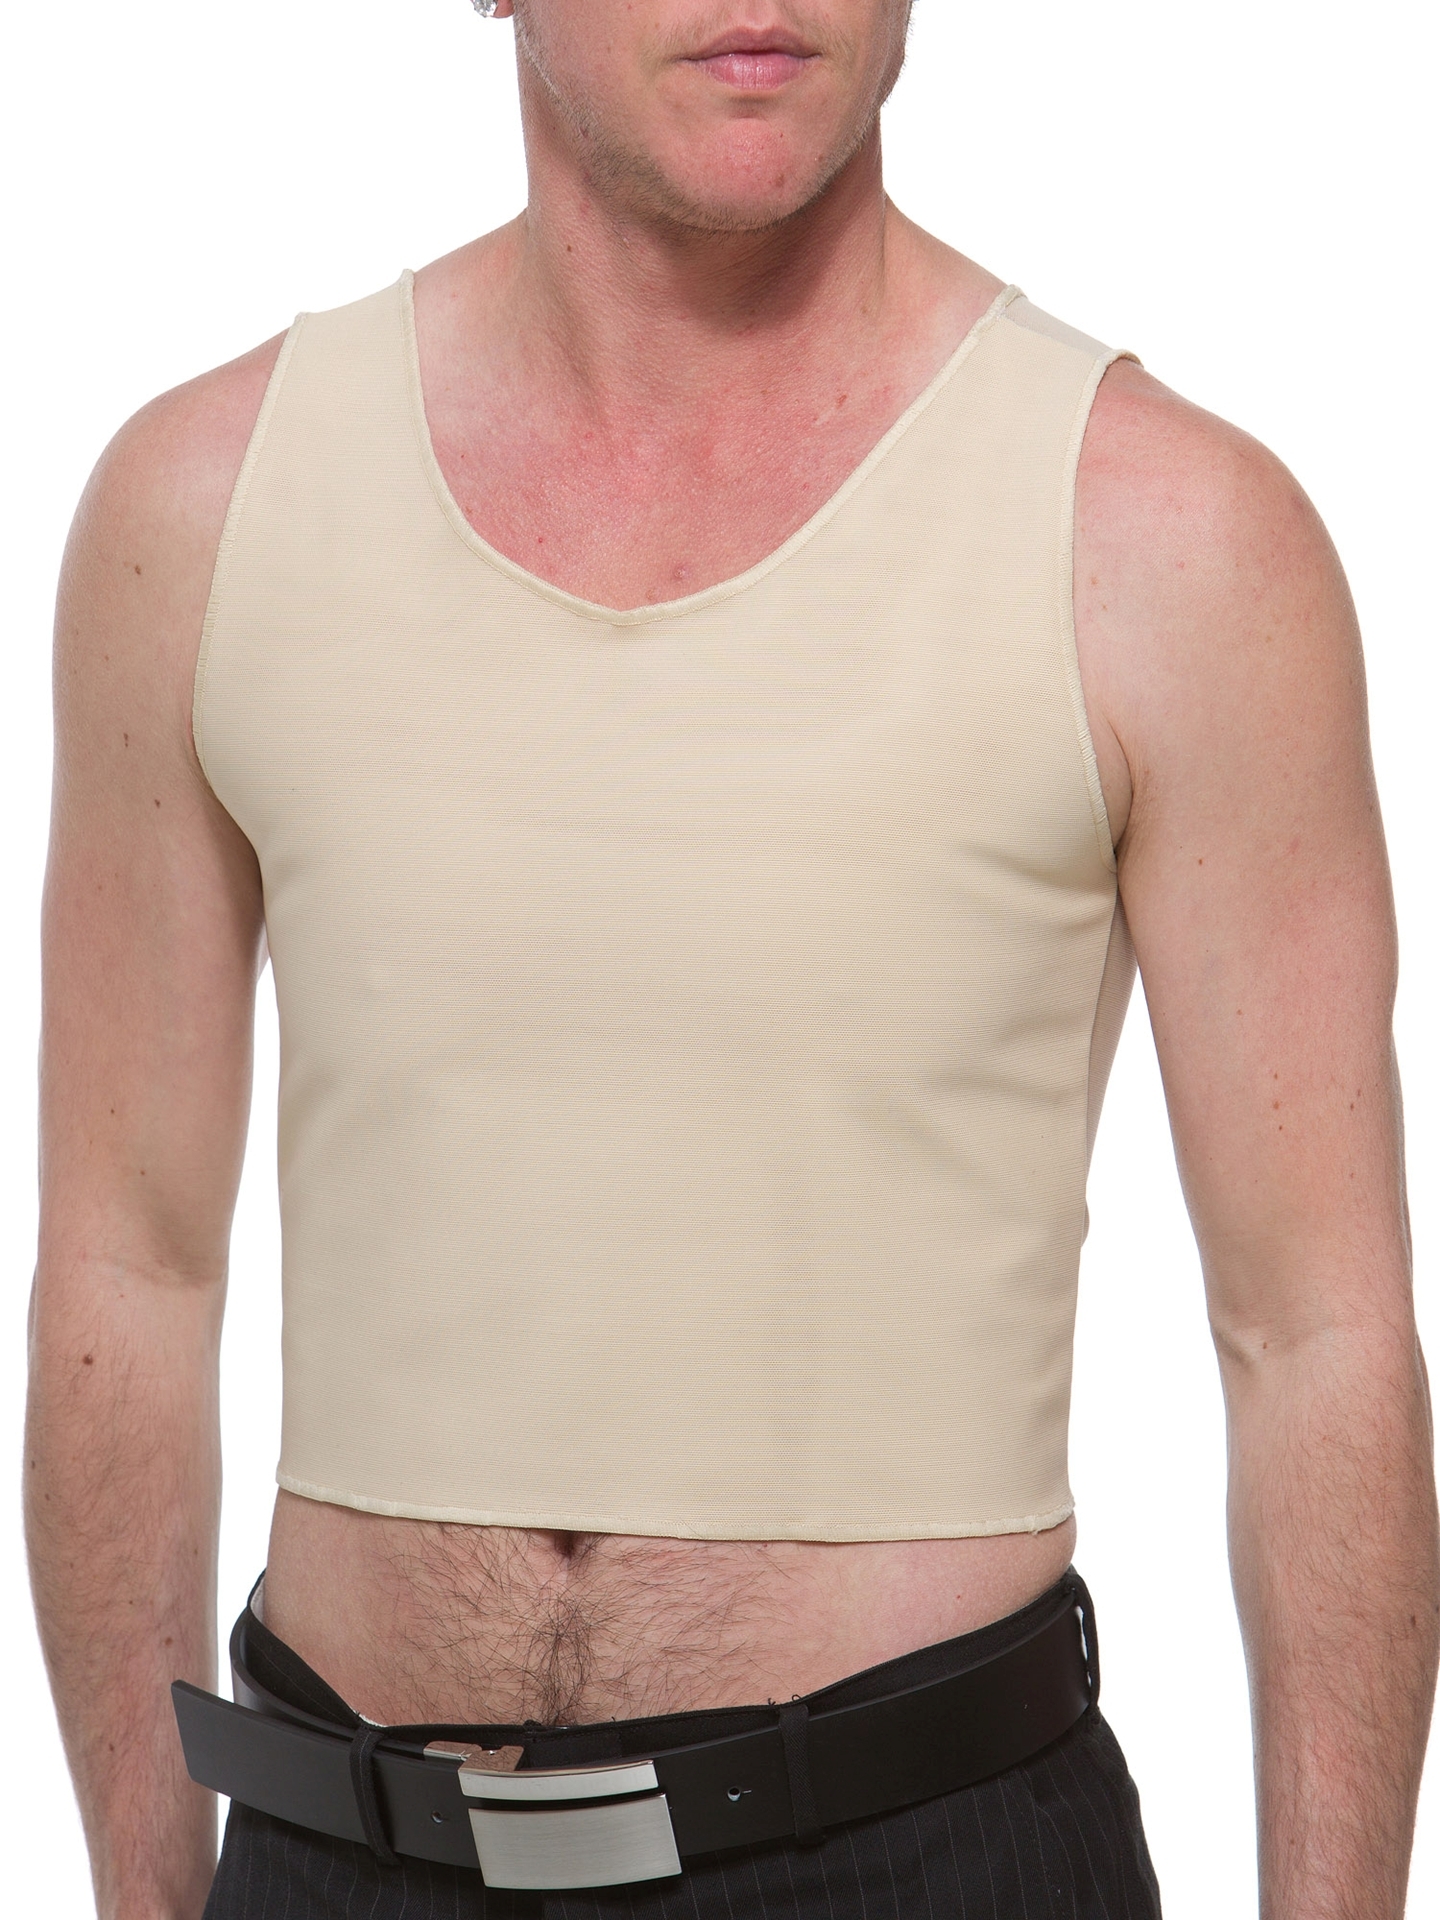 Underworks The Cotton Lined Power Chest Binder Top - White - XS